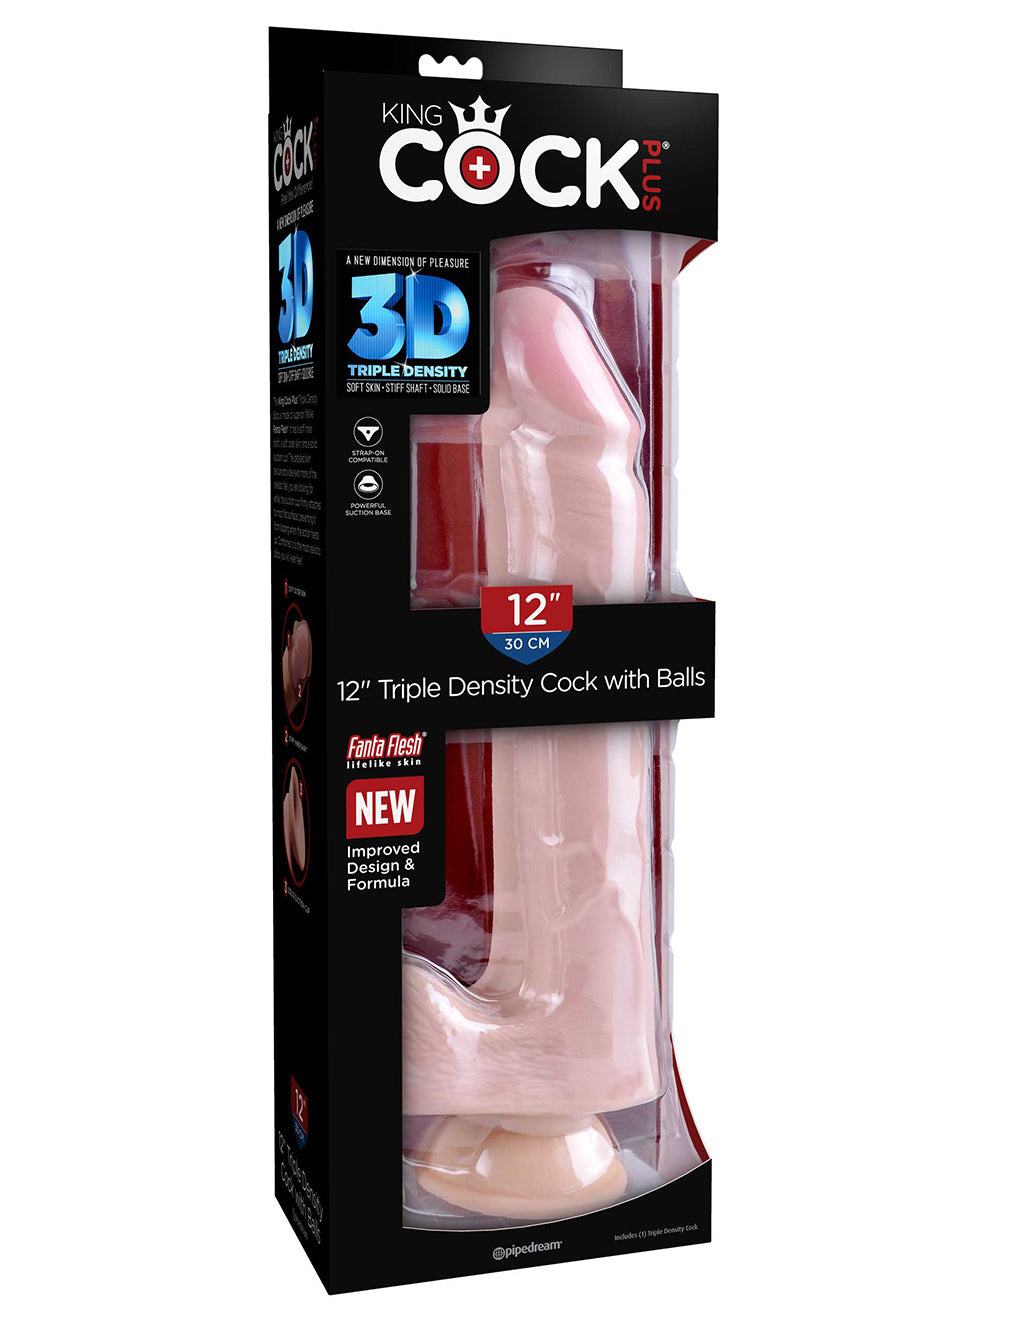 King Cock Plus 12" 3D Cock w/ Balls- Package